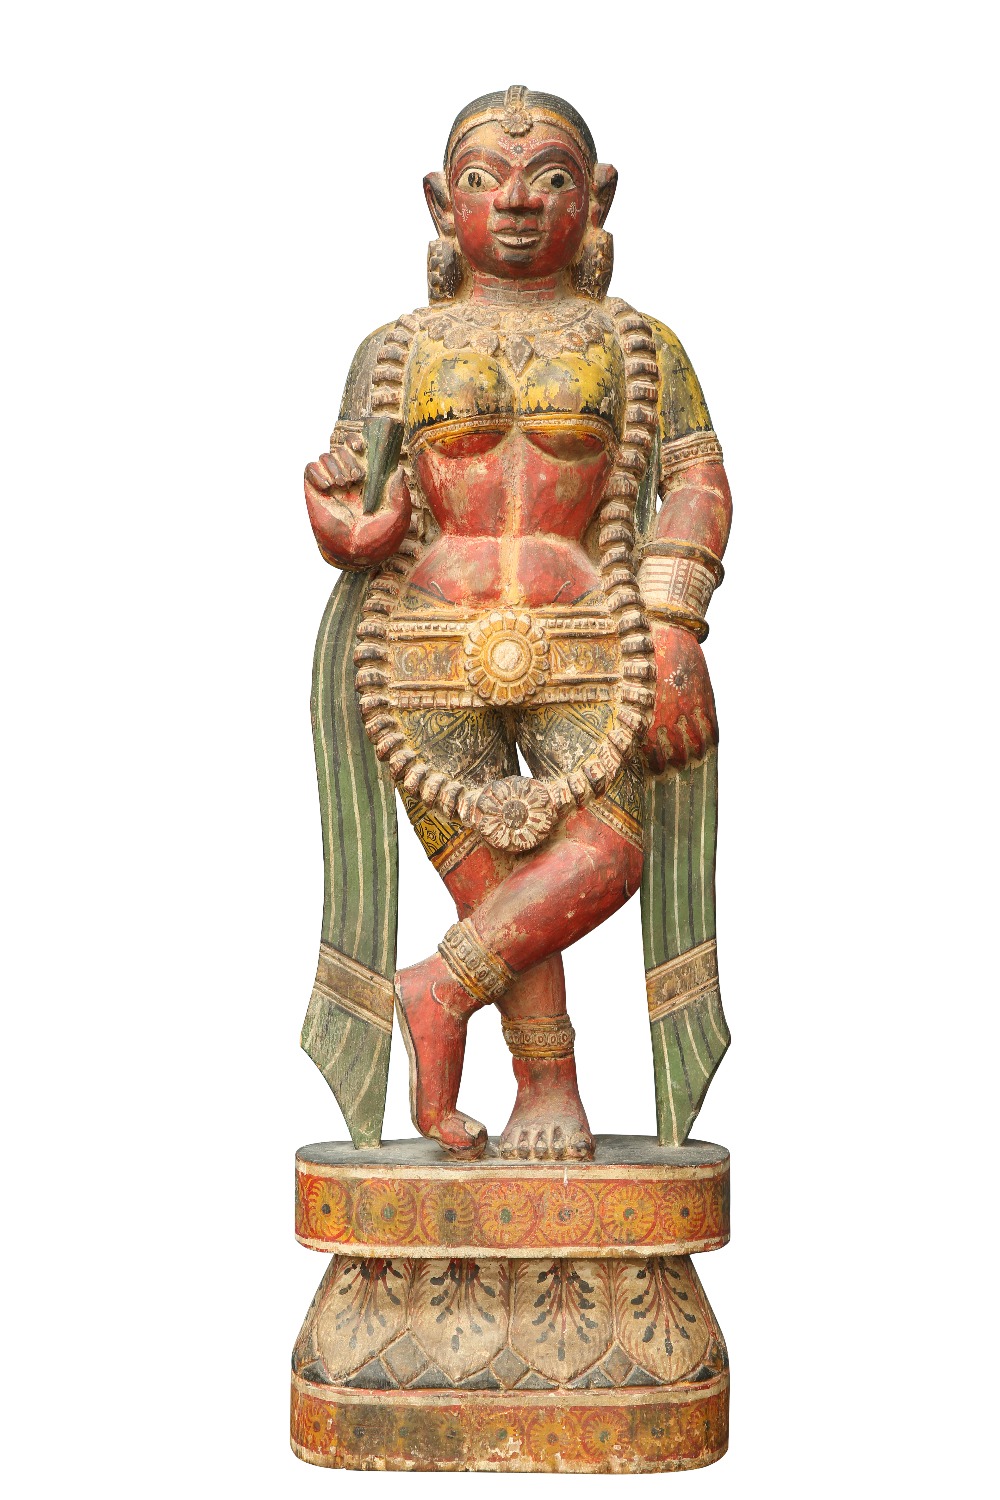 A LARGE CARVED AND PAINTED WOODEN FIGURE OF A GODDESS